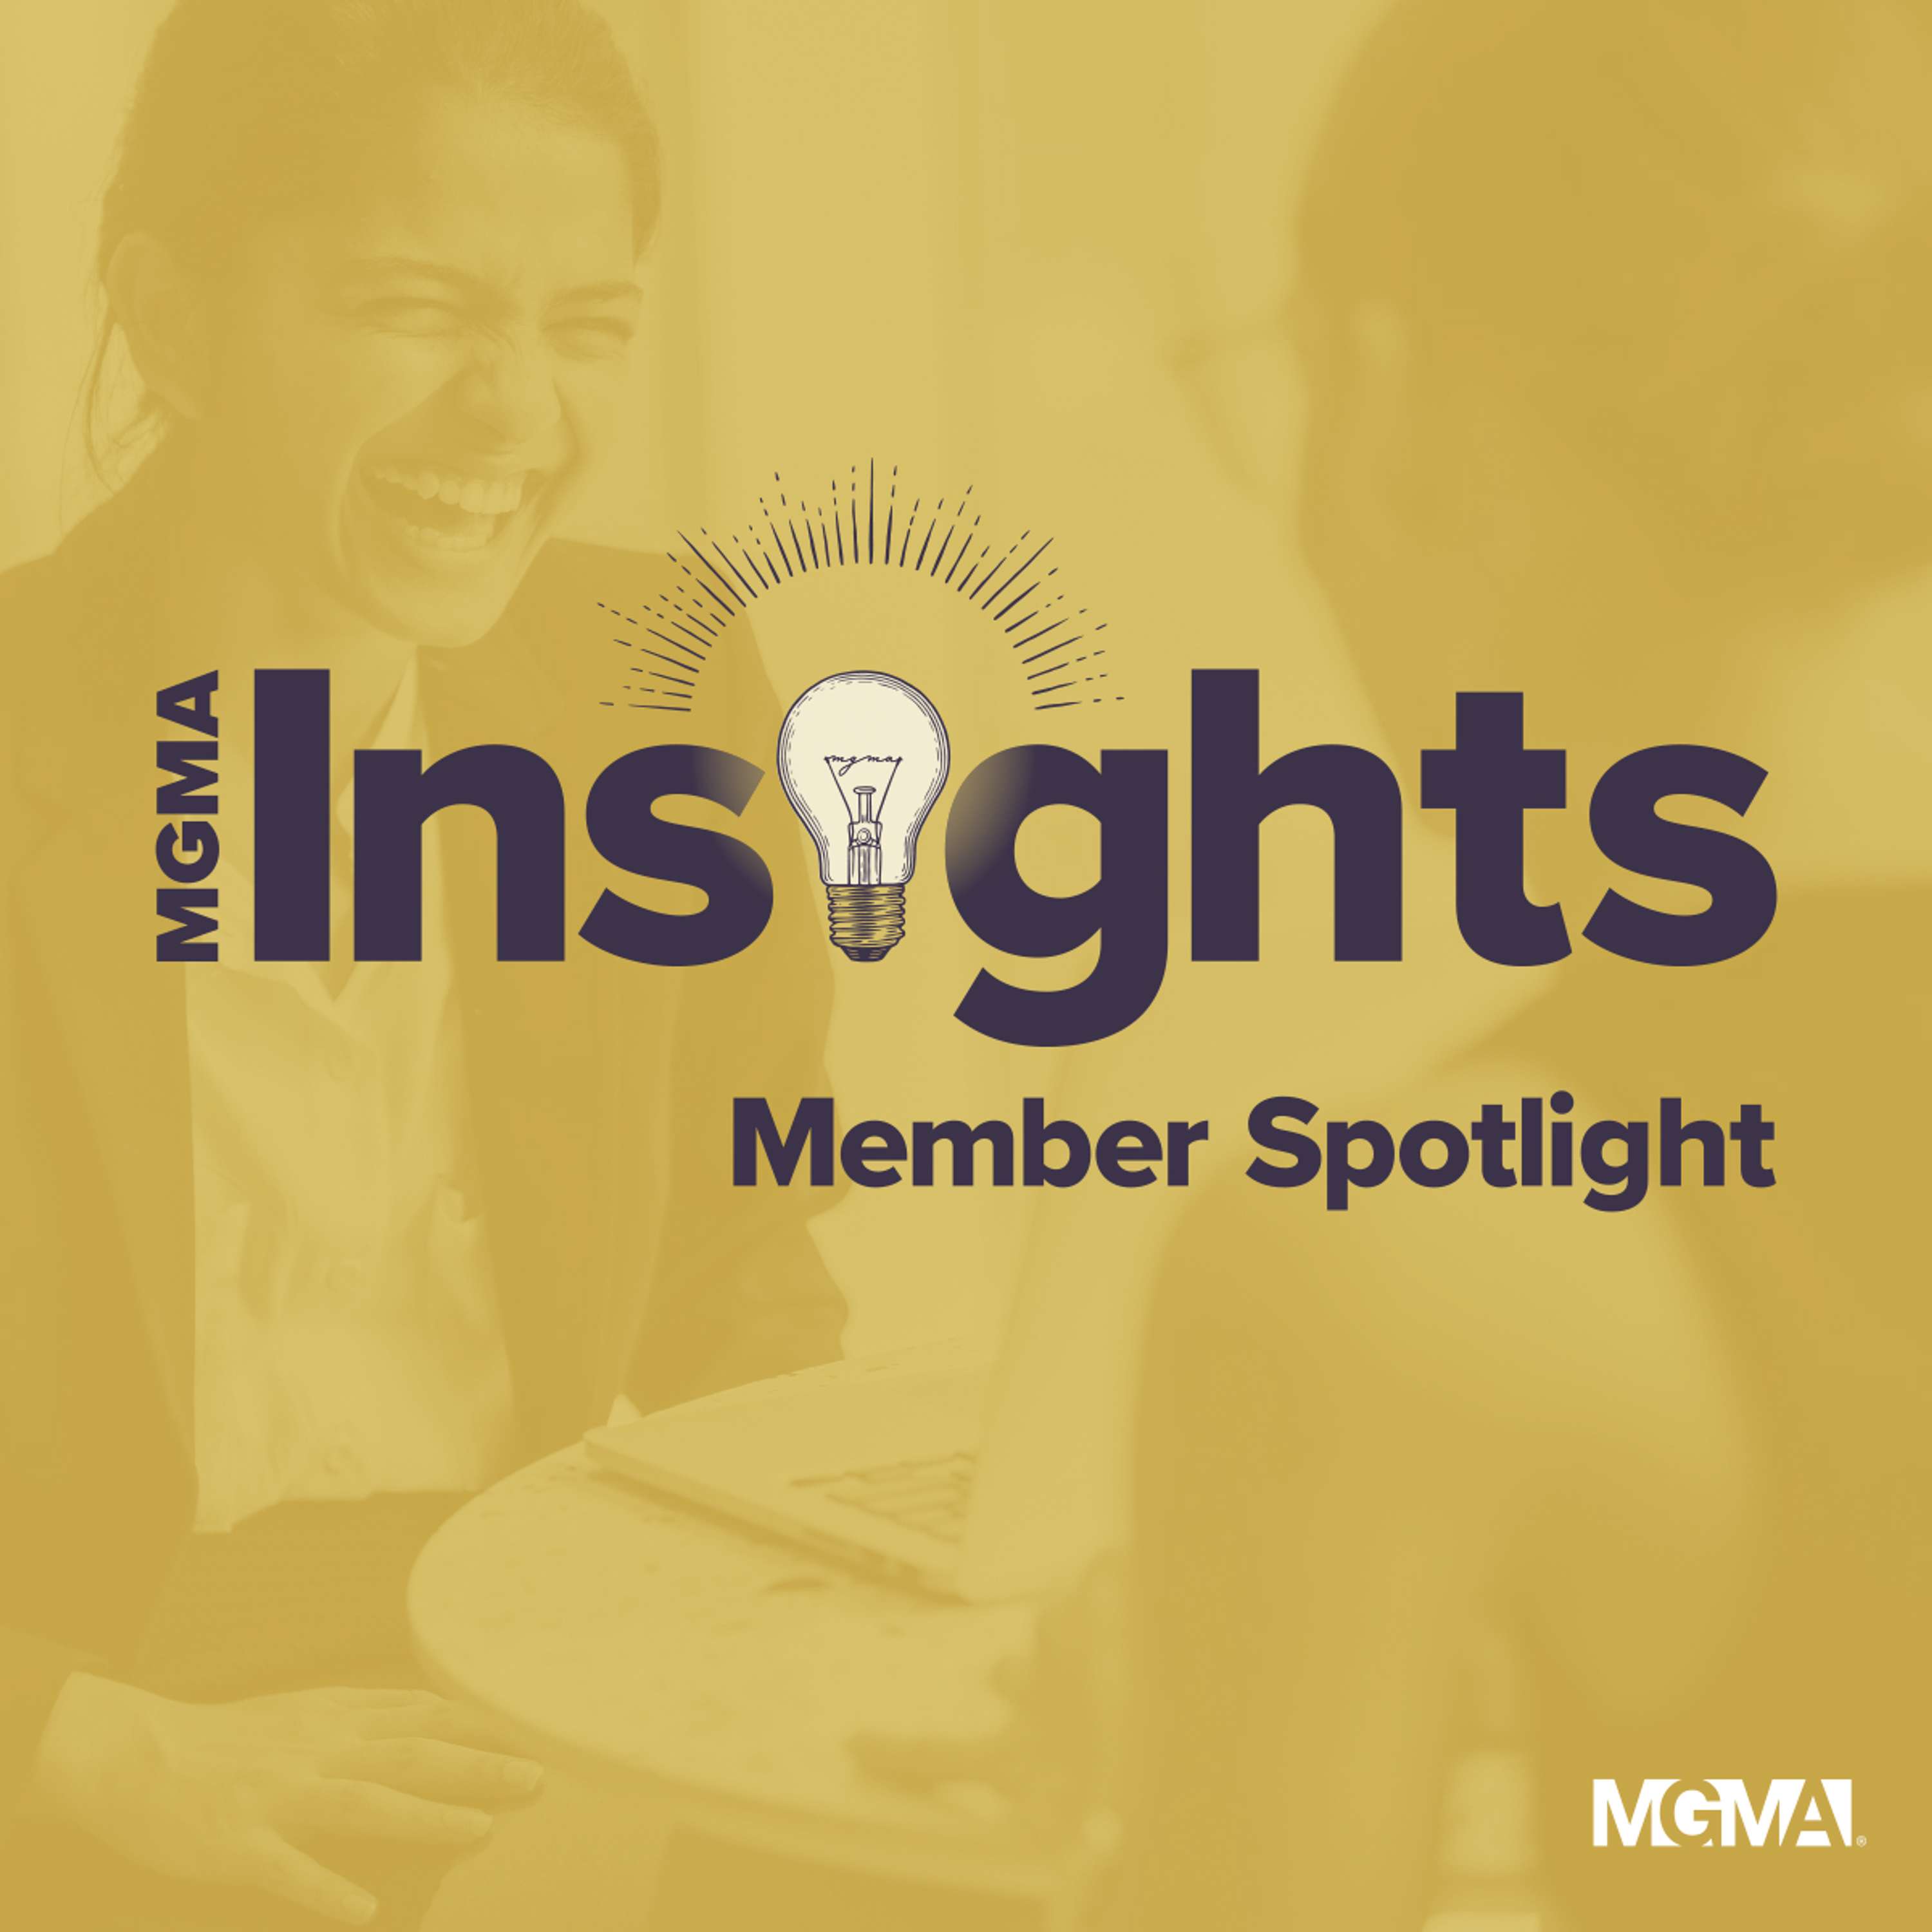 MGMA Member Spotlight: Delores McNair and Bryana Blanco on the Impact of Mentorship on Healthcare Careers